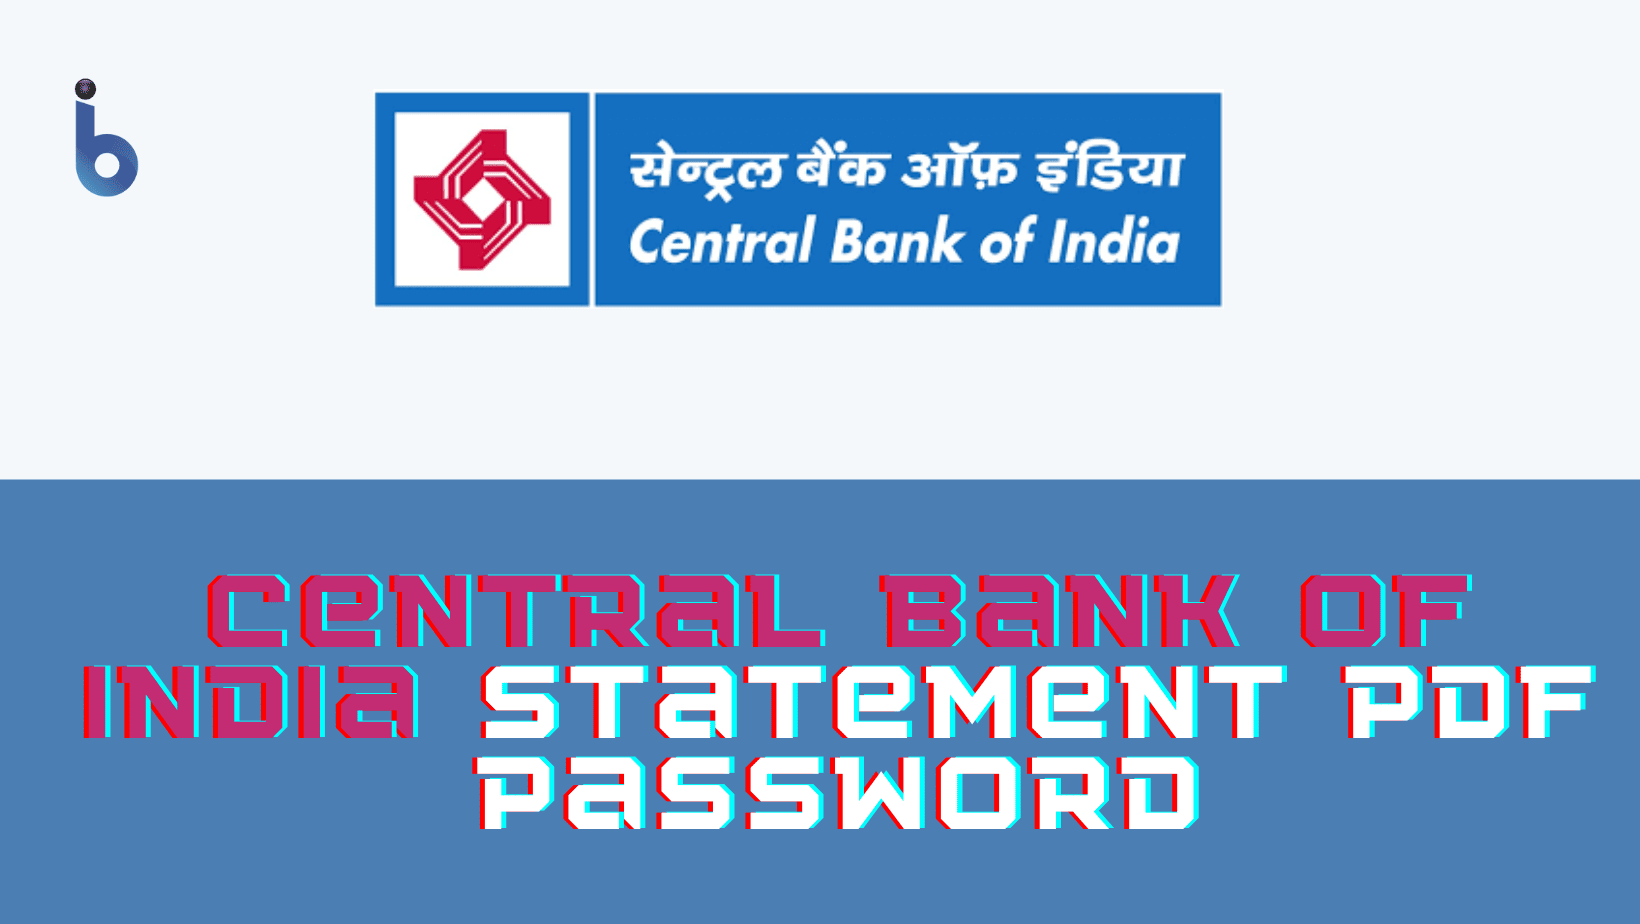 Central Bank of India Statement PDF Password